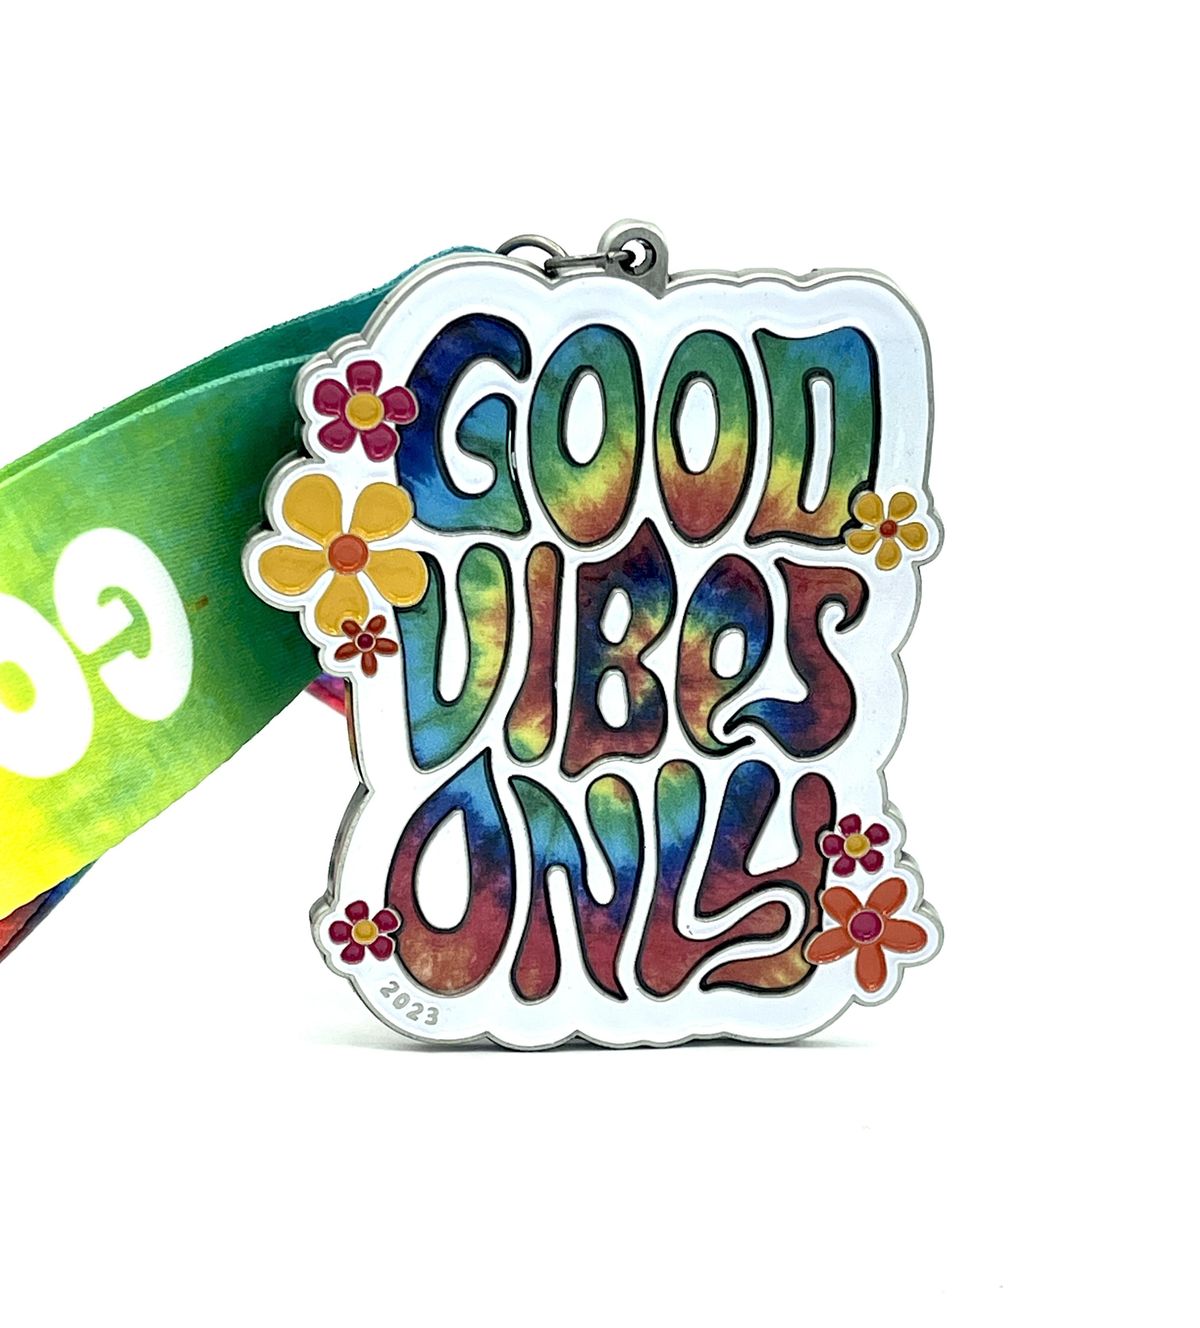 New Year: Good Vibes Only 1M 5K 10K 13.1 26.2-Now Only $9